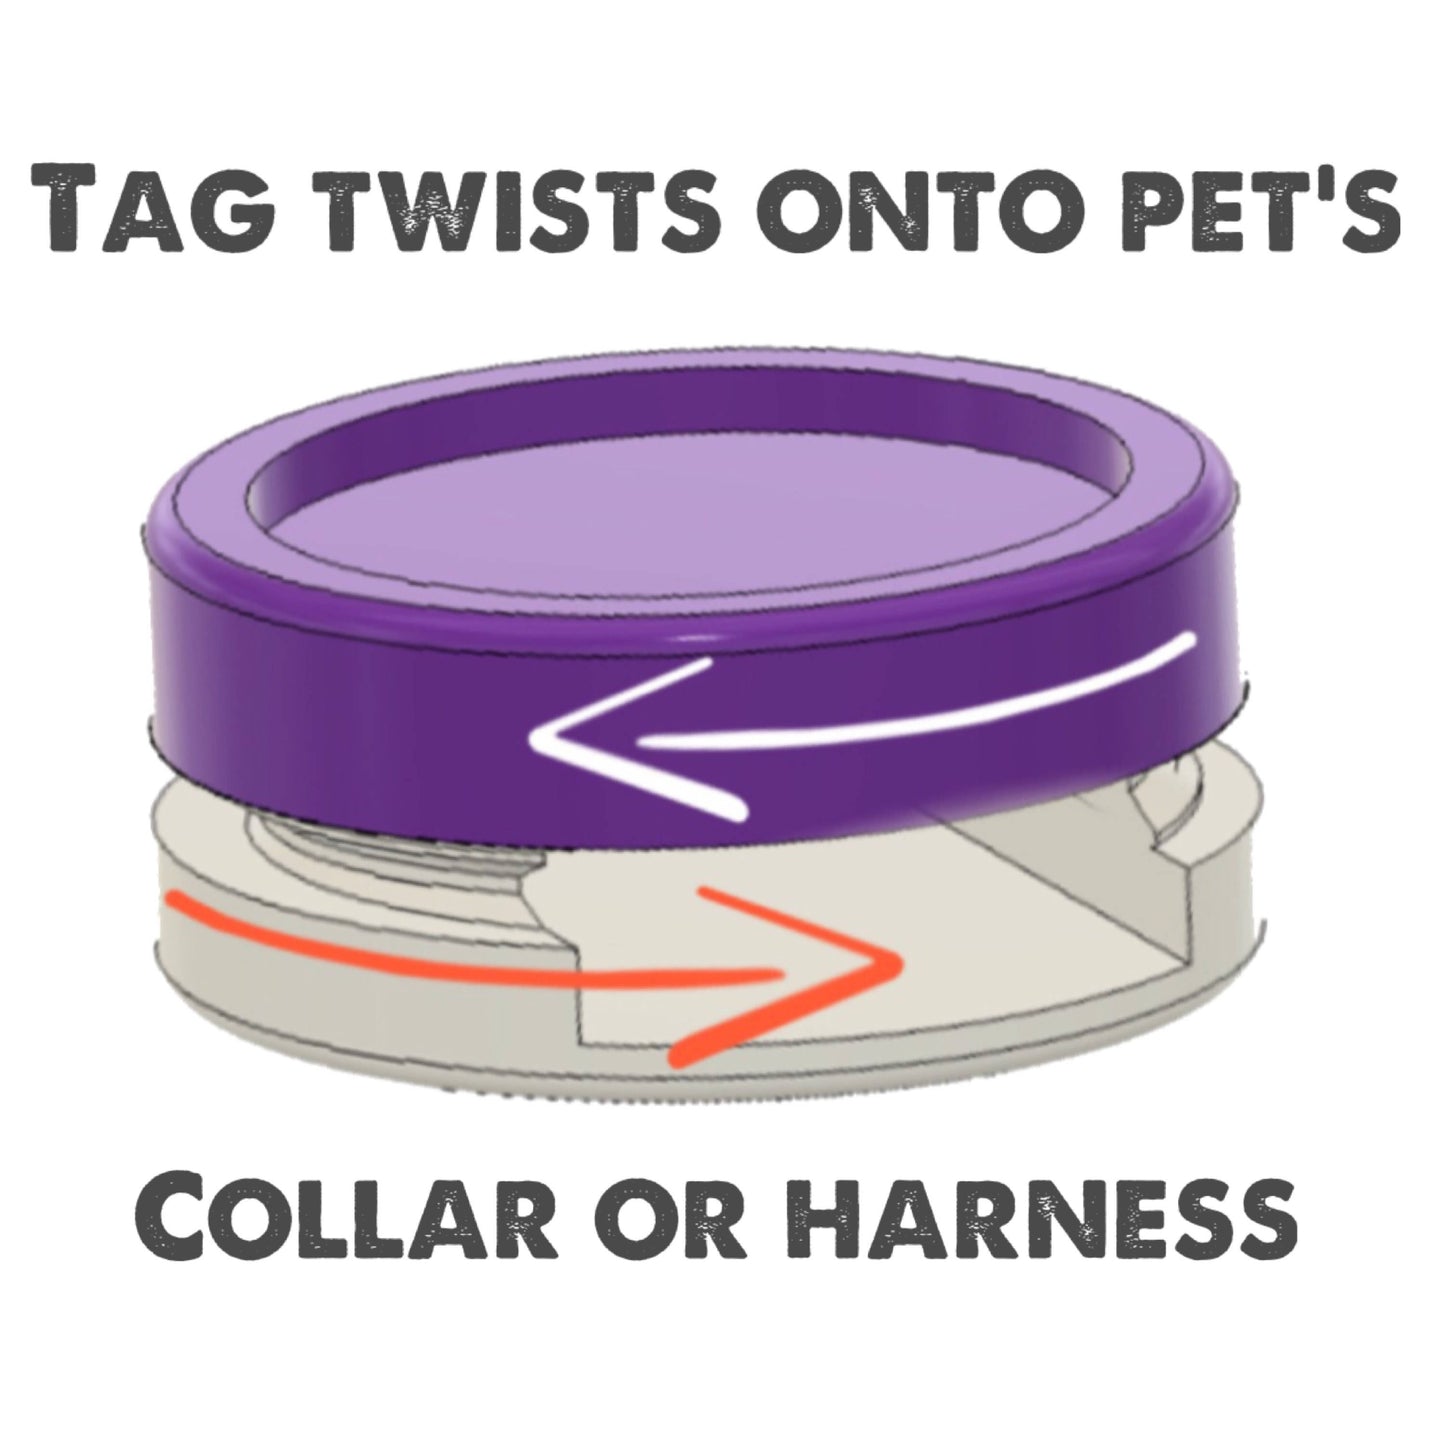 Candy Corn Halloween Tag- Silent, Eco-Friendly, Ringless ID Tag for Cats and Dogs